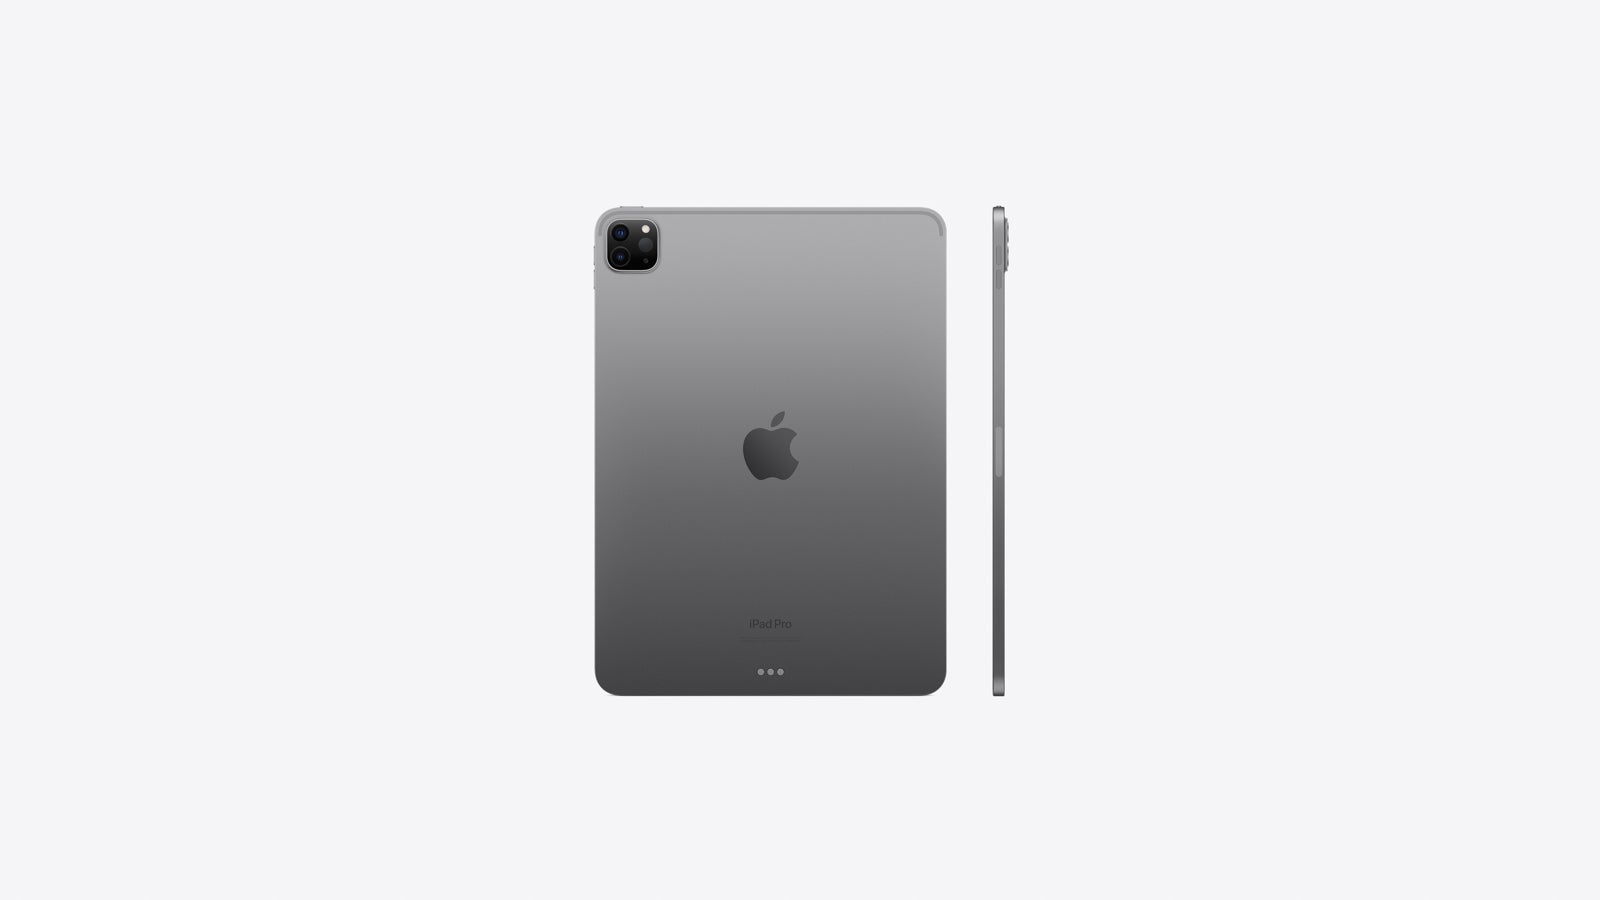 iPad Pro from 2022 showcasing the Space Gray color option - iPad Pro (2024) colors: expectations